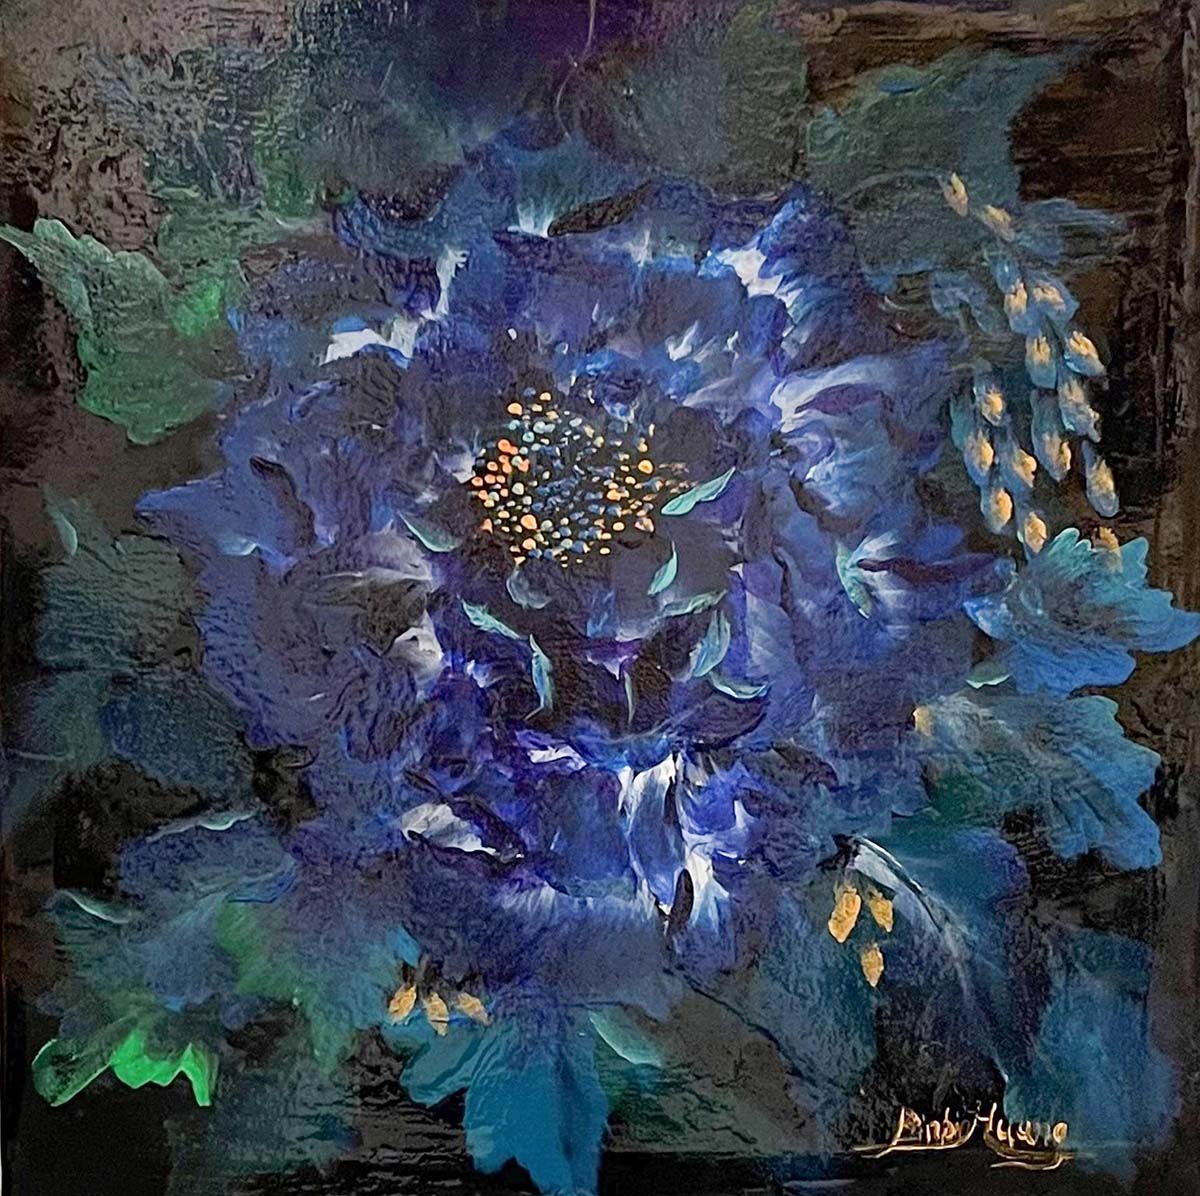 Contemporary Art. Title: Blue Flower, Acrylic on Canvas, 12x12 in by Canadian artist Binbin Huang.